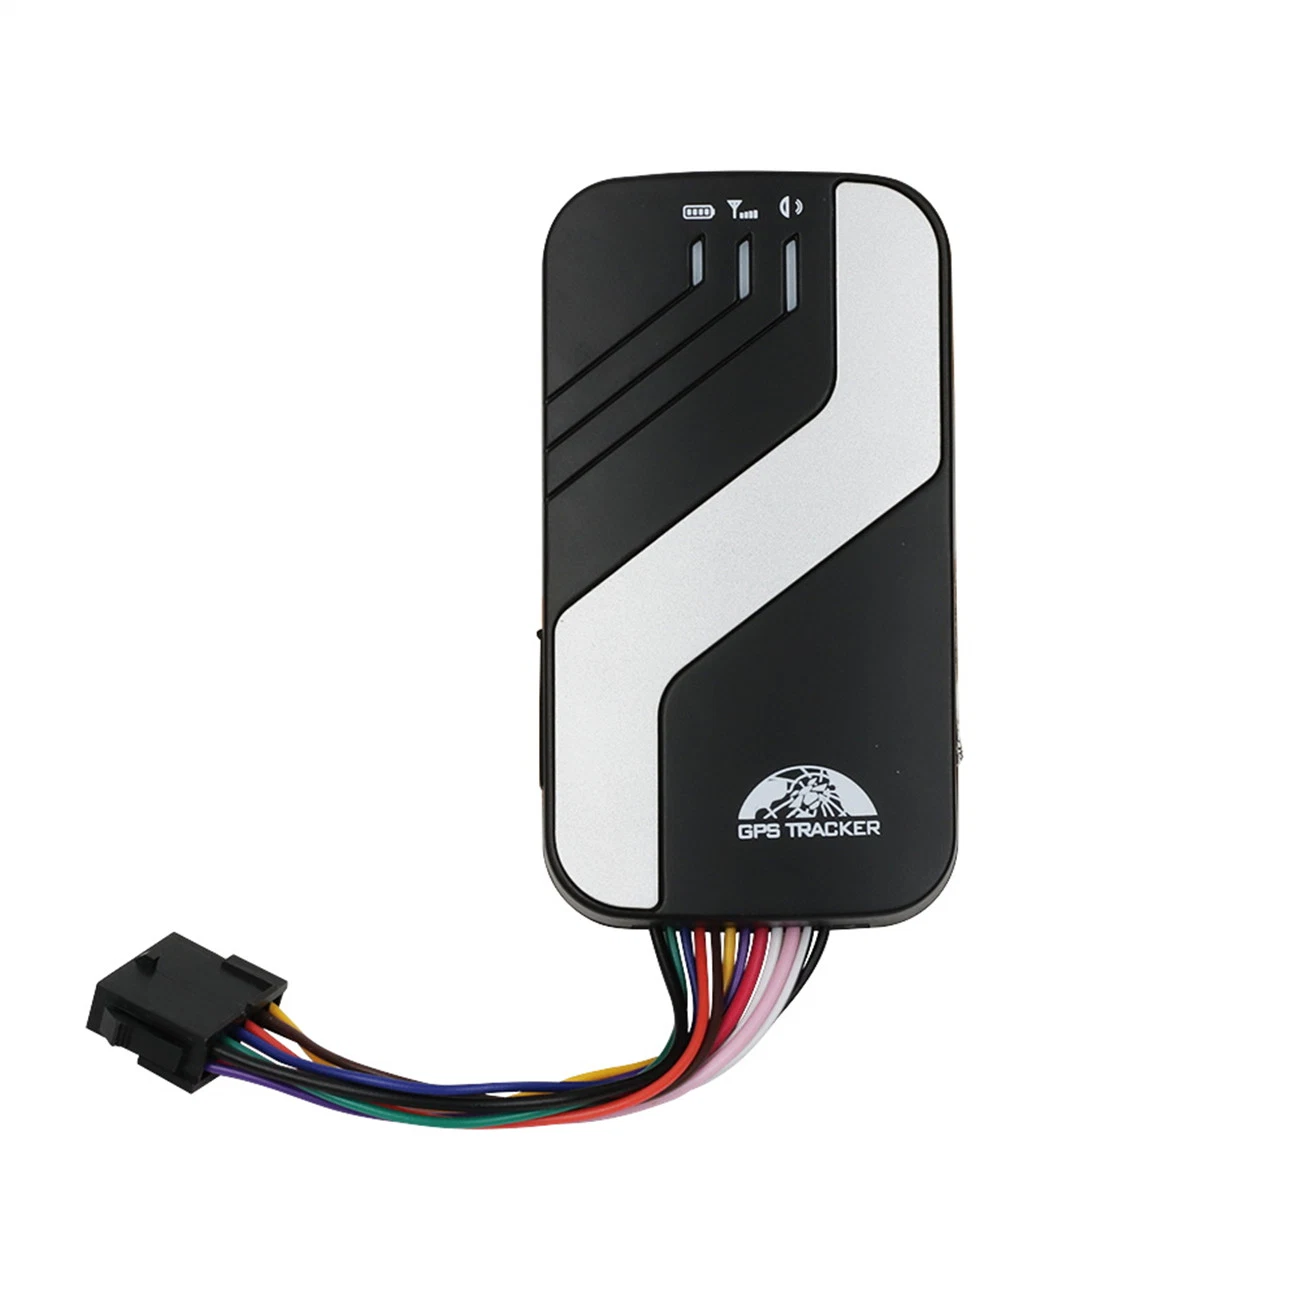 New Coban GPS403 2g 4G LTE Car GPS Tracking System with Ota Upgrade Firmware Over The Air